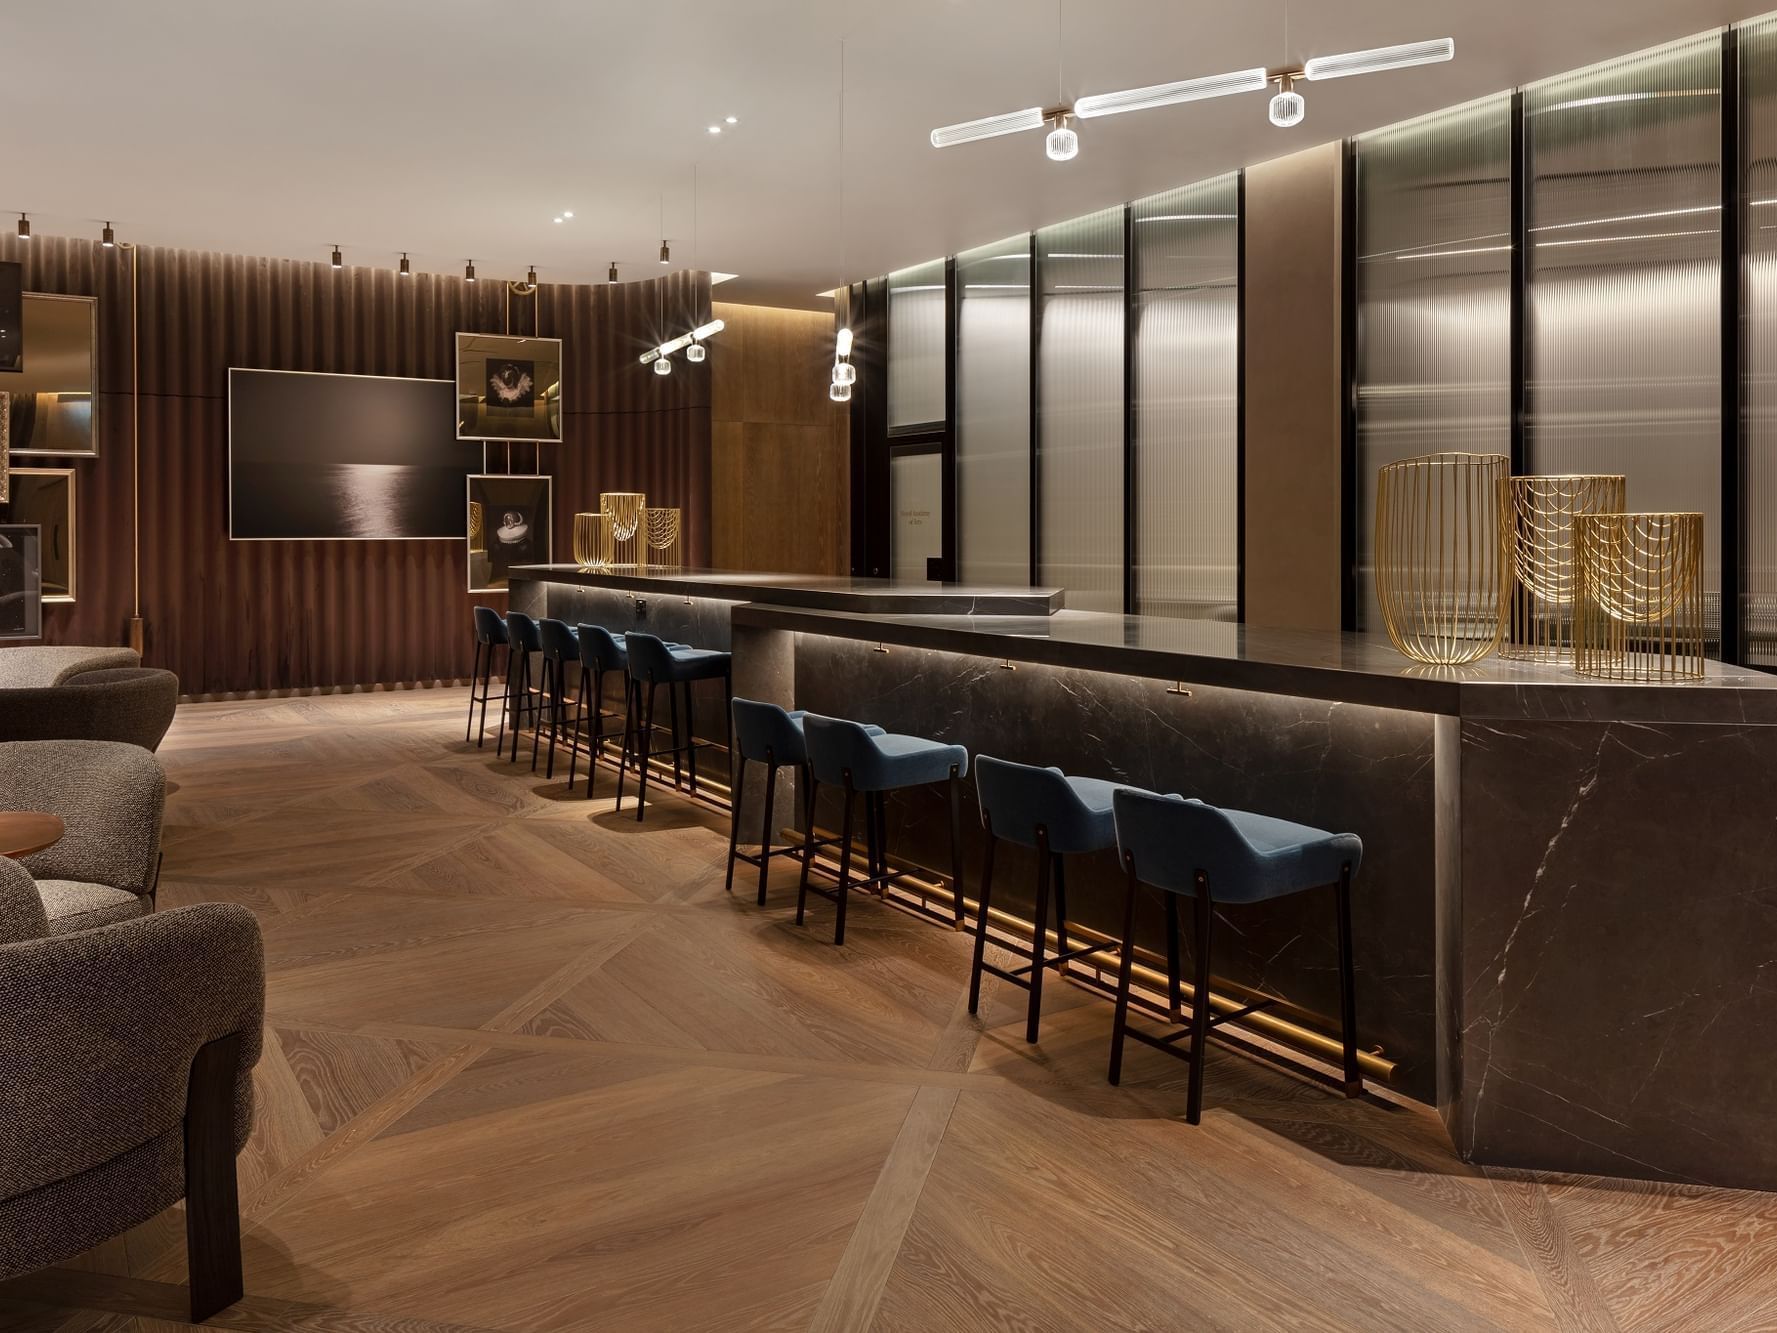 Interior of The Gallery with bar seating at The Londoner Hotel